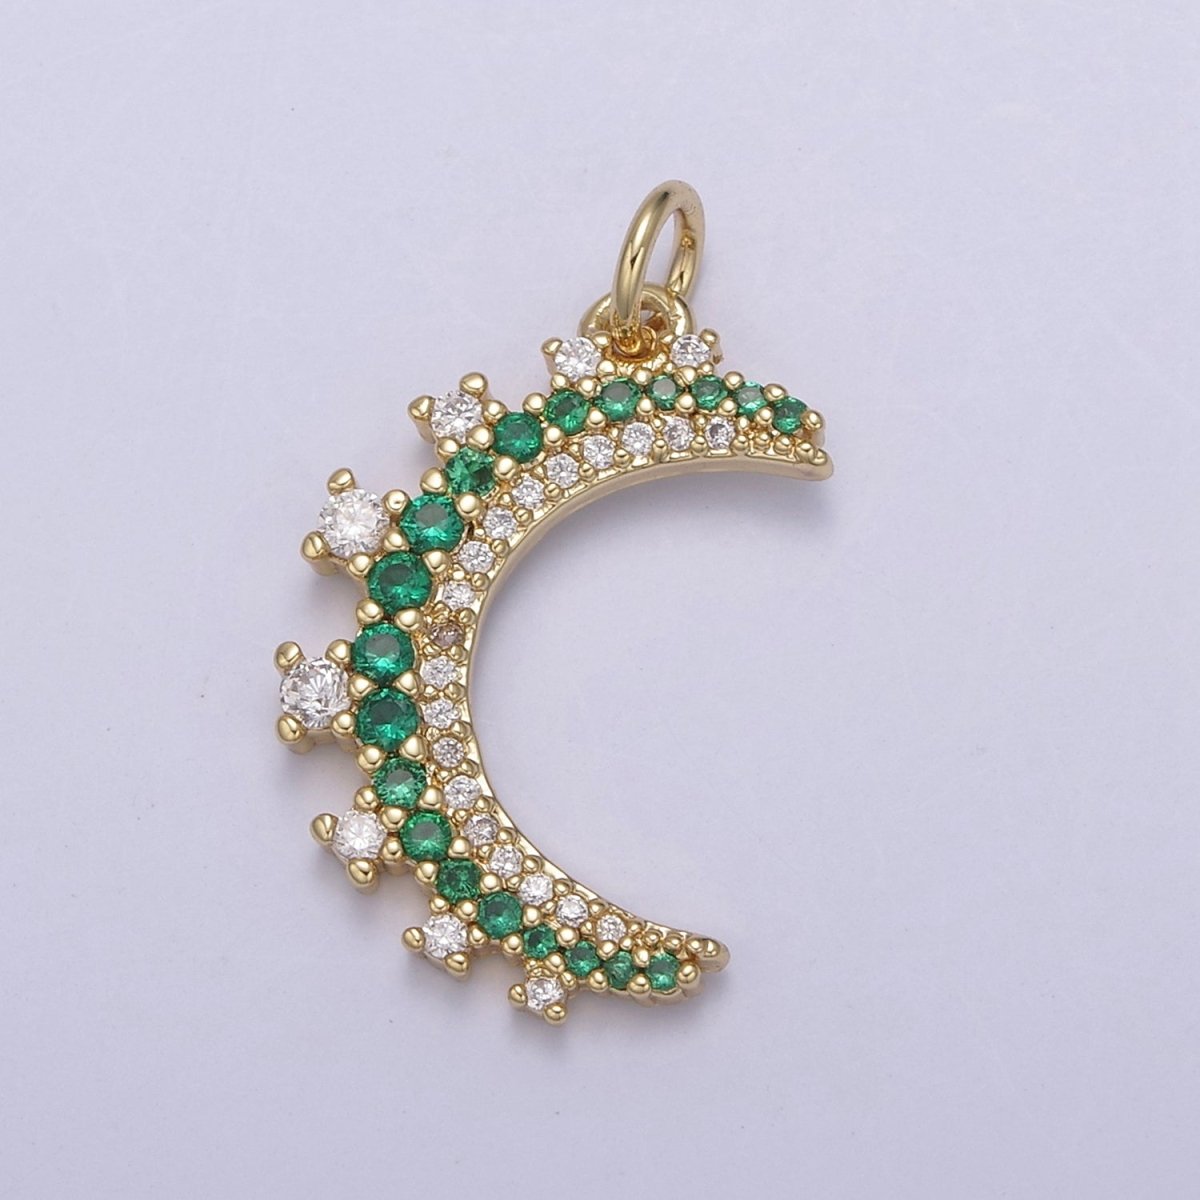 Wholesale 14k Gold Filled Crescent Moon Charm Micro Pave Half Moon Necklace Pendant CZ Moon Necklace Gold Celestial Jewelry N-783 - N-787 - DLUXCA